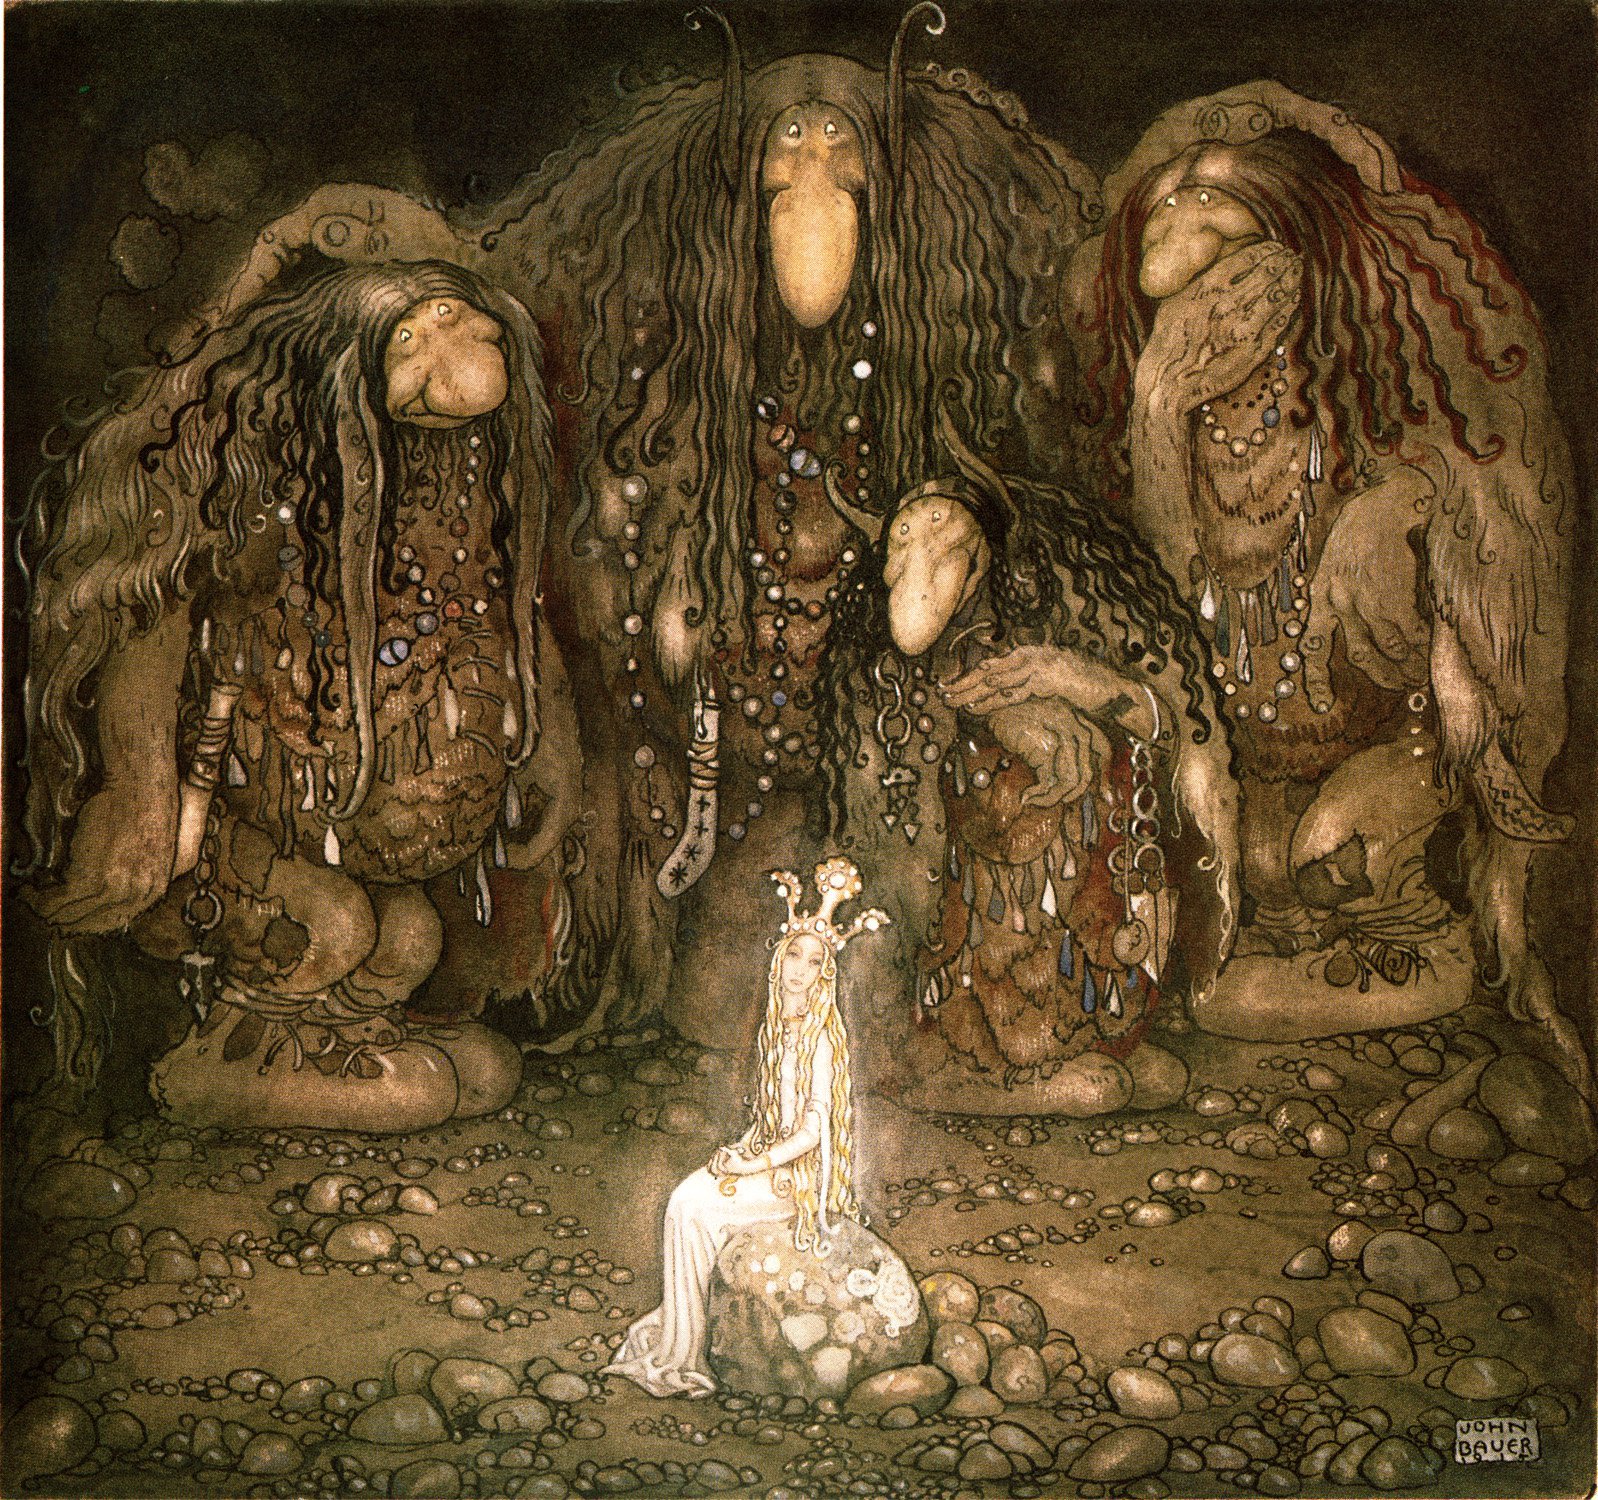 A group of large trolls surround a small glowing girl who sits on a rock.